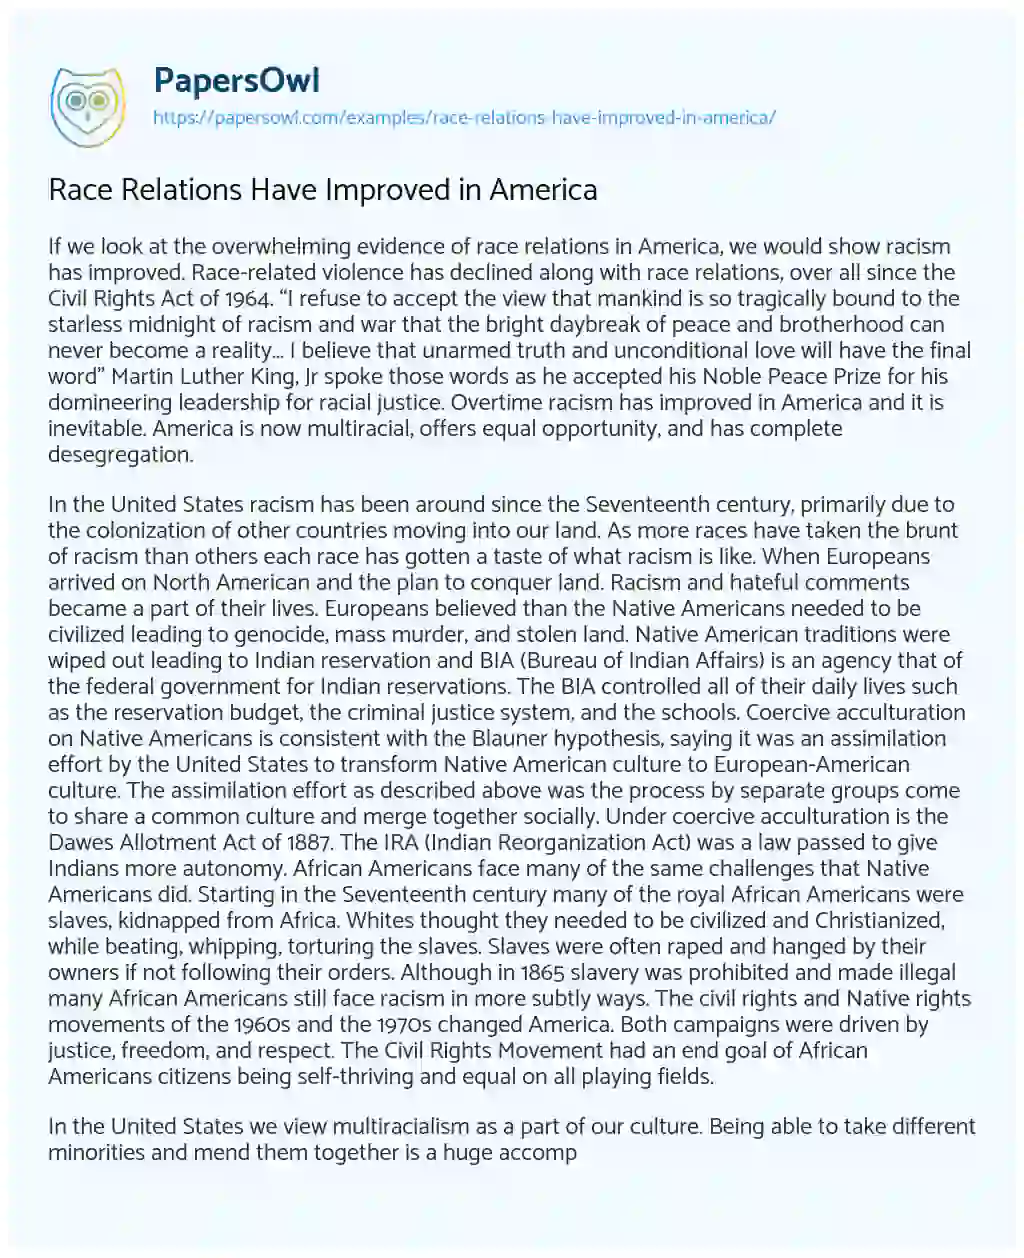 Essay on Race Relations have Improved in America